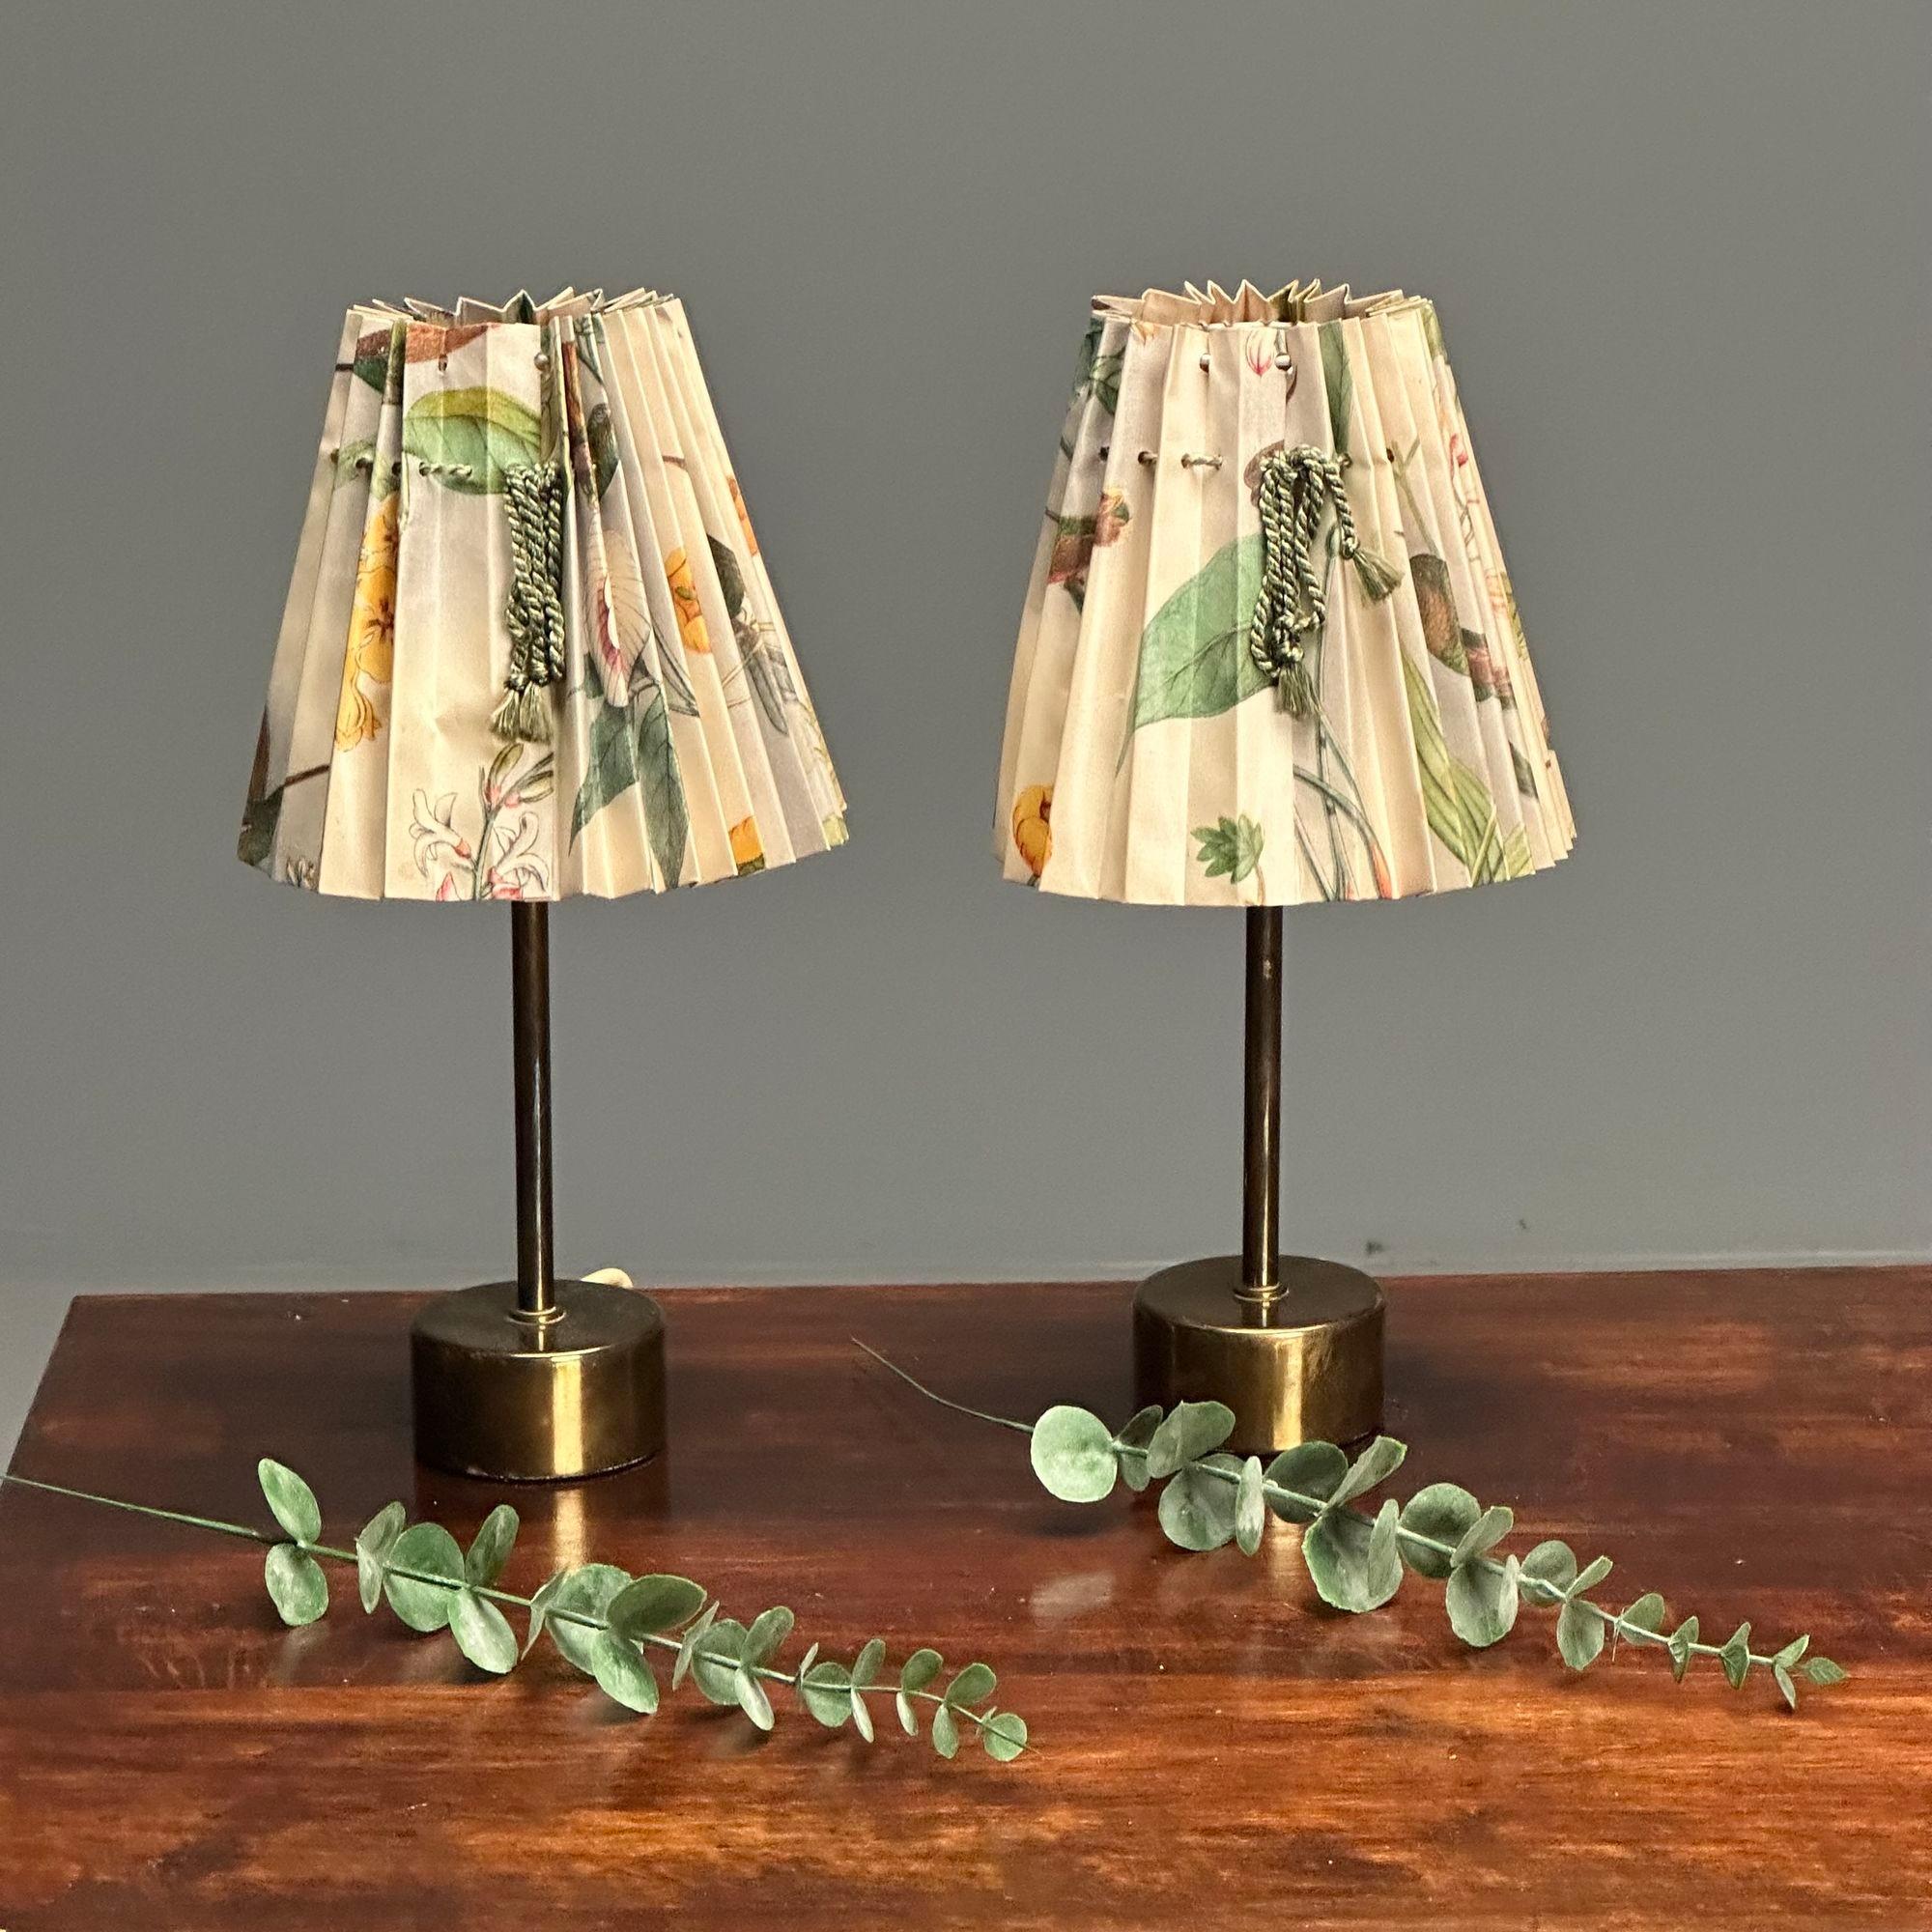 ASEA, Swedish Mid-Century Modern Table Lamps, Brass, Floral Shades, Sweden 1950s

Pair of Model E1173 table lamps designed and produced by ASEA in Sweden circa 1950s. Having a brass base and neck. Each lamp maintains their original floral paper